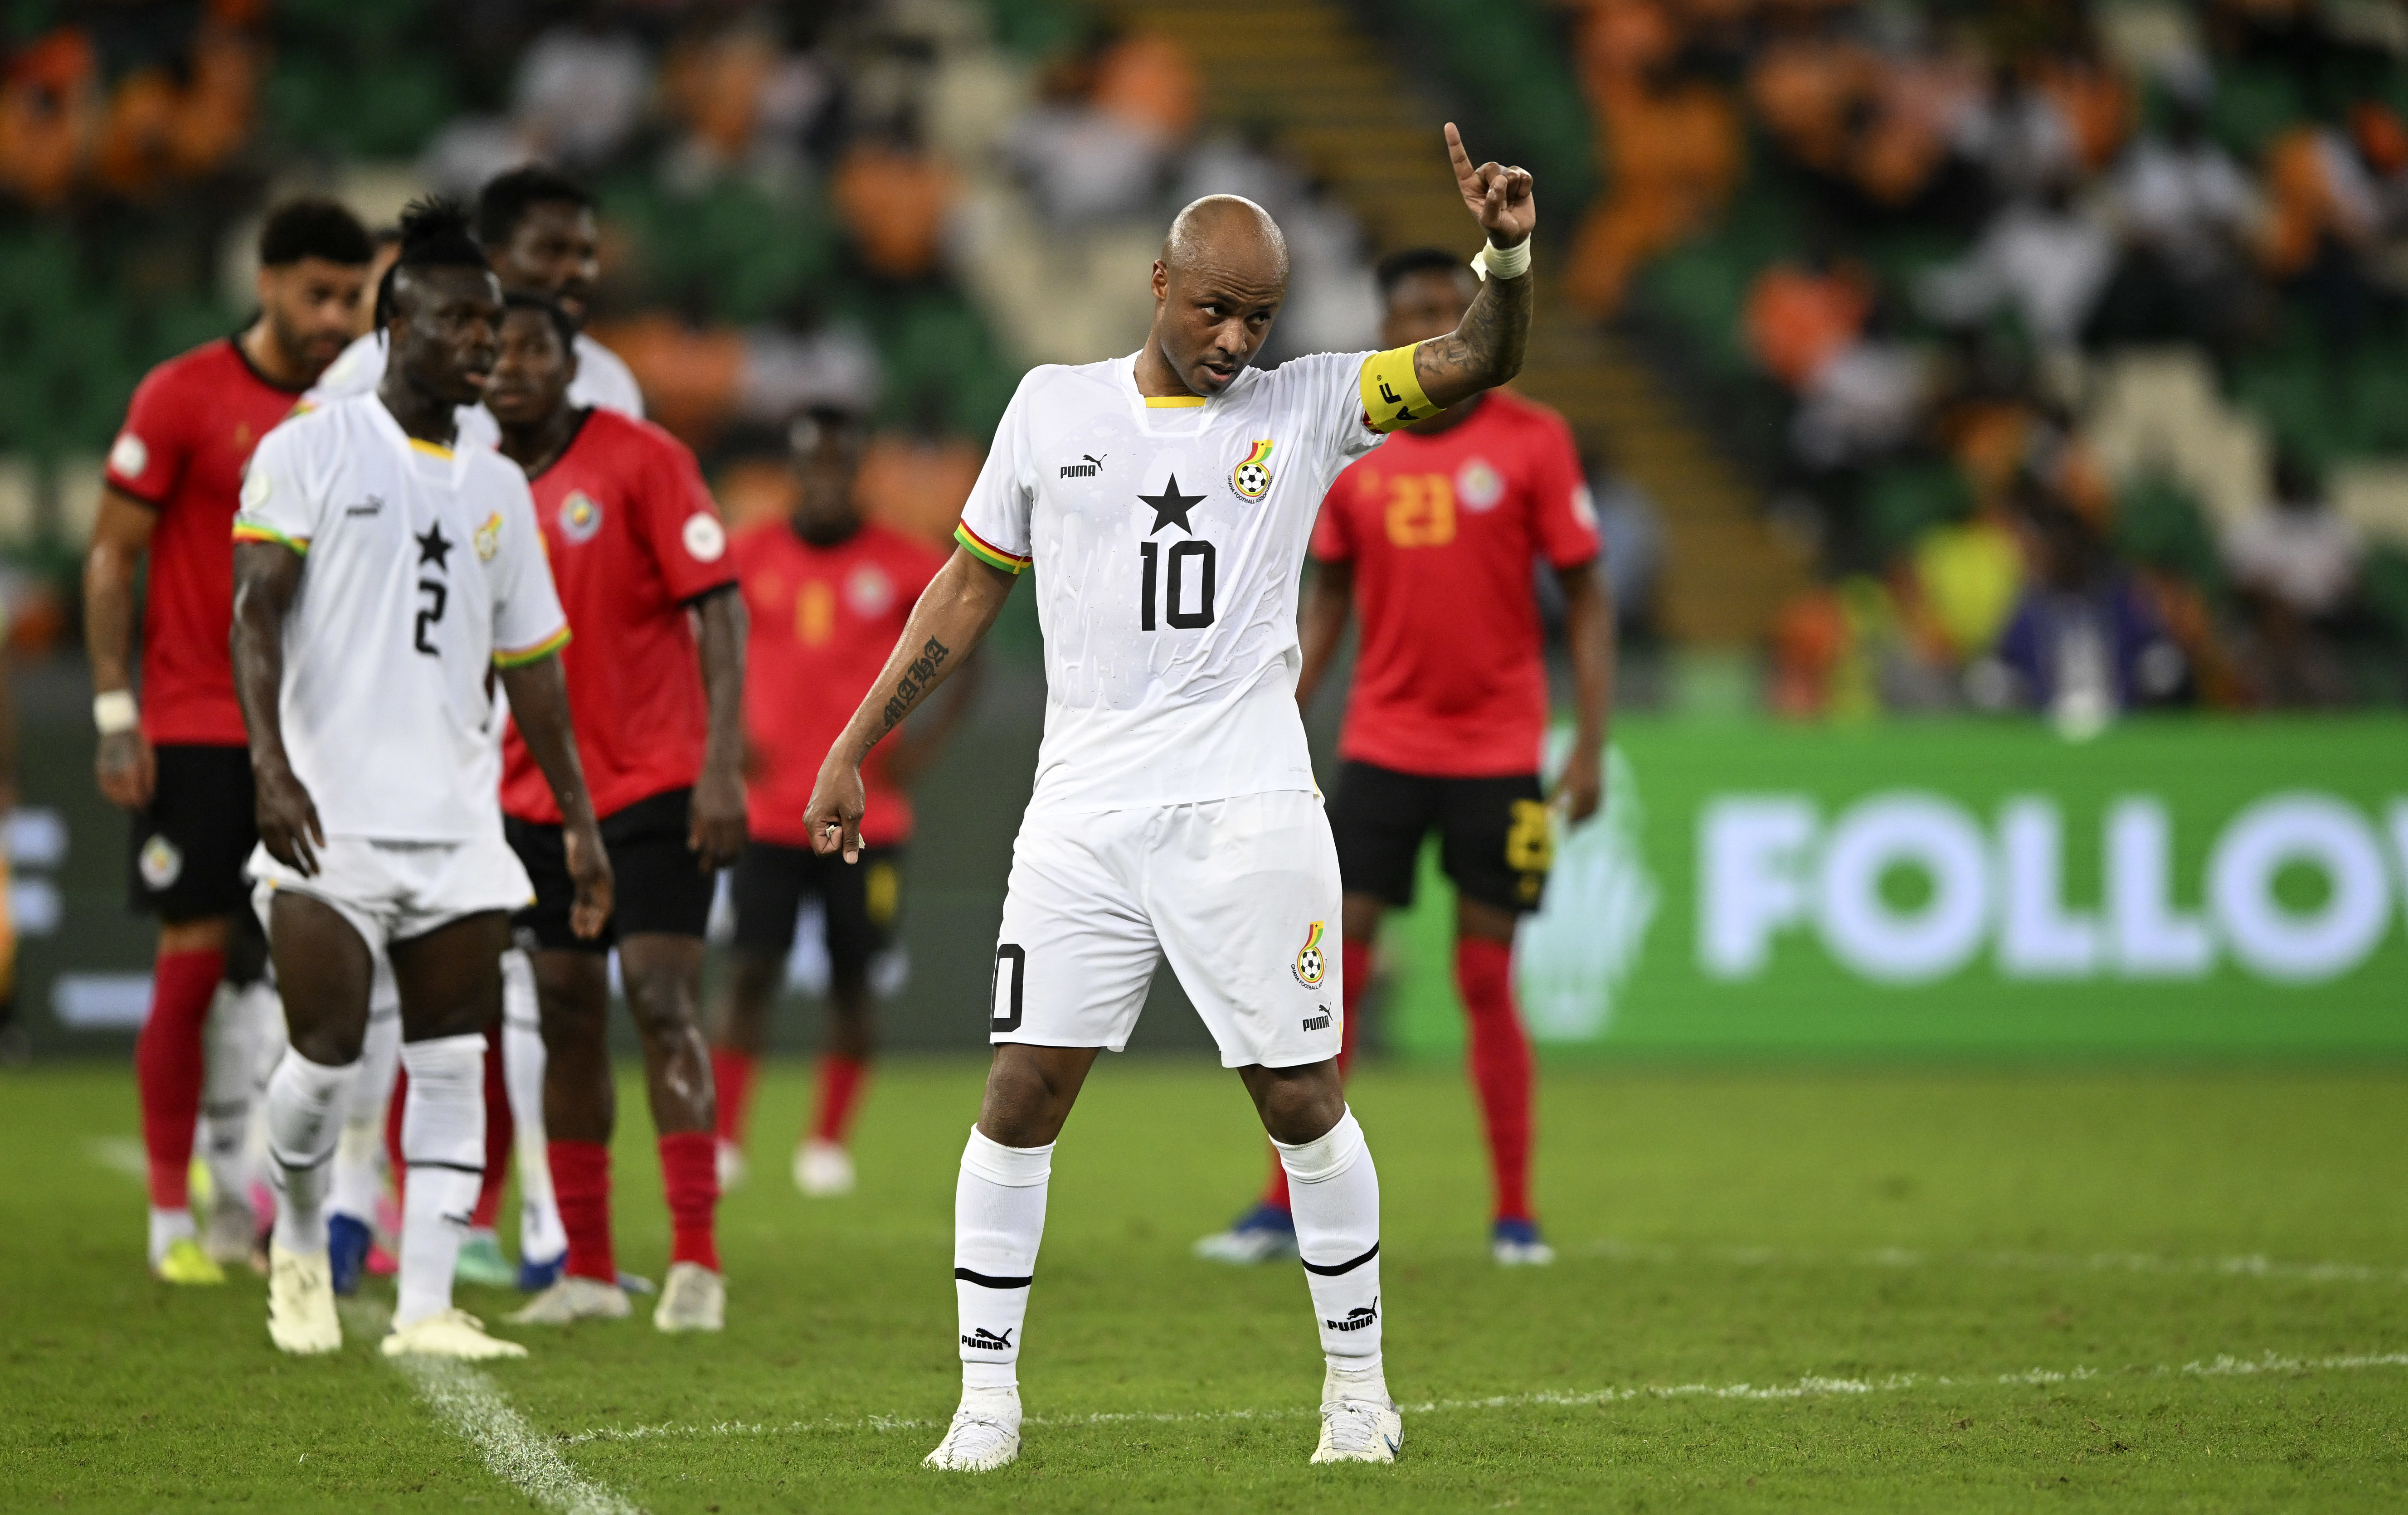 Sarkodie, Davido show support for Andre Ayew after belated apology over AFCON exit